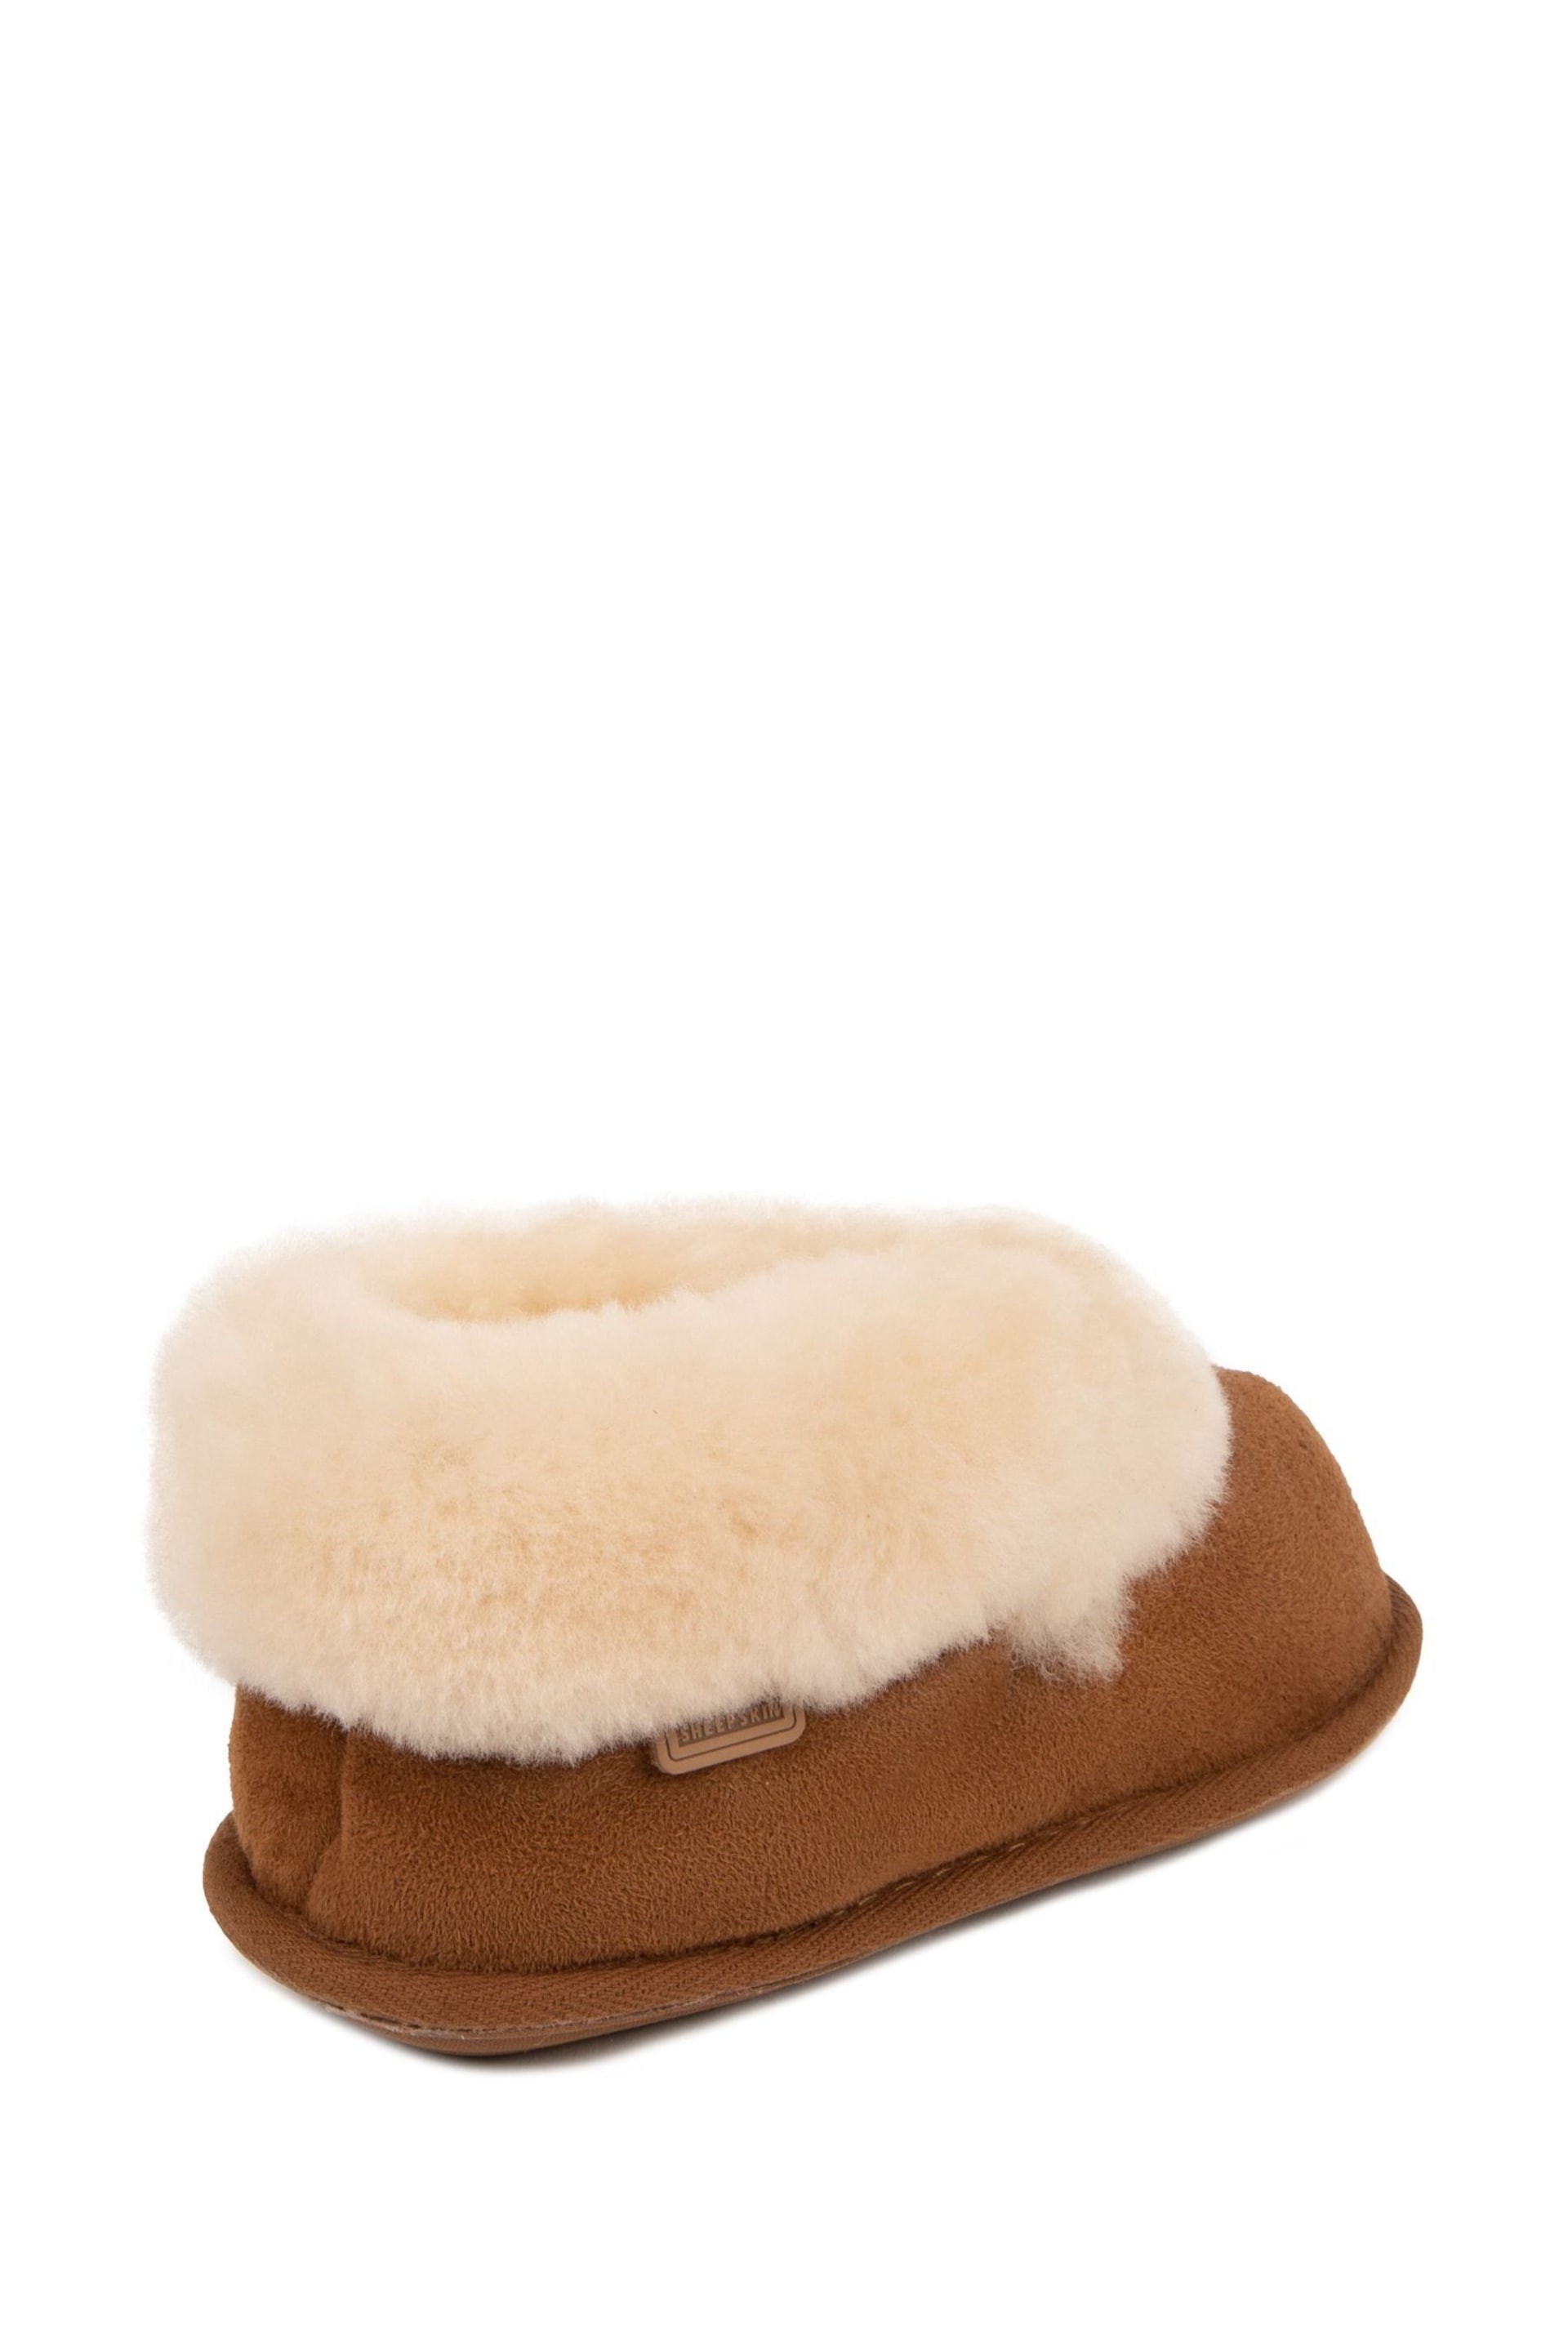 Just Sheepskin™ Brown Childrens Classic Slippers - Image 4 of 5